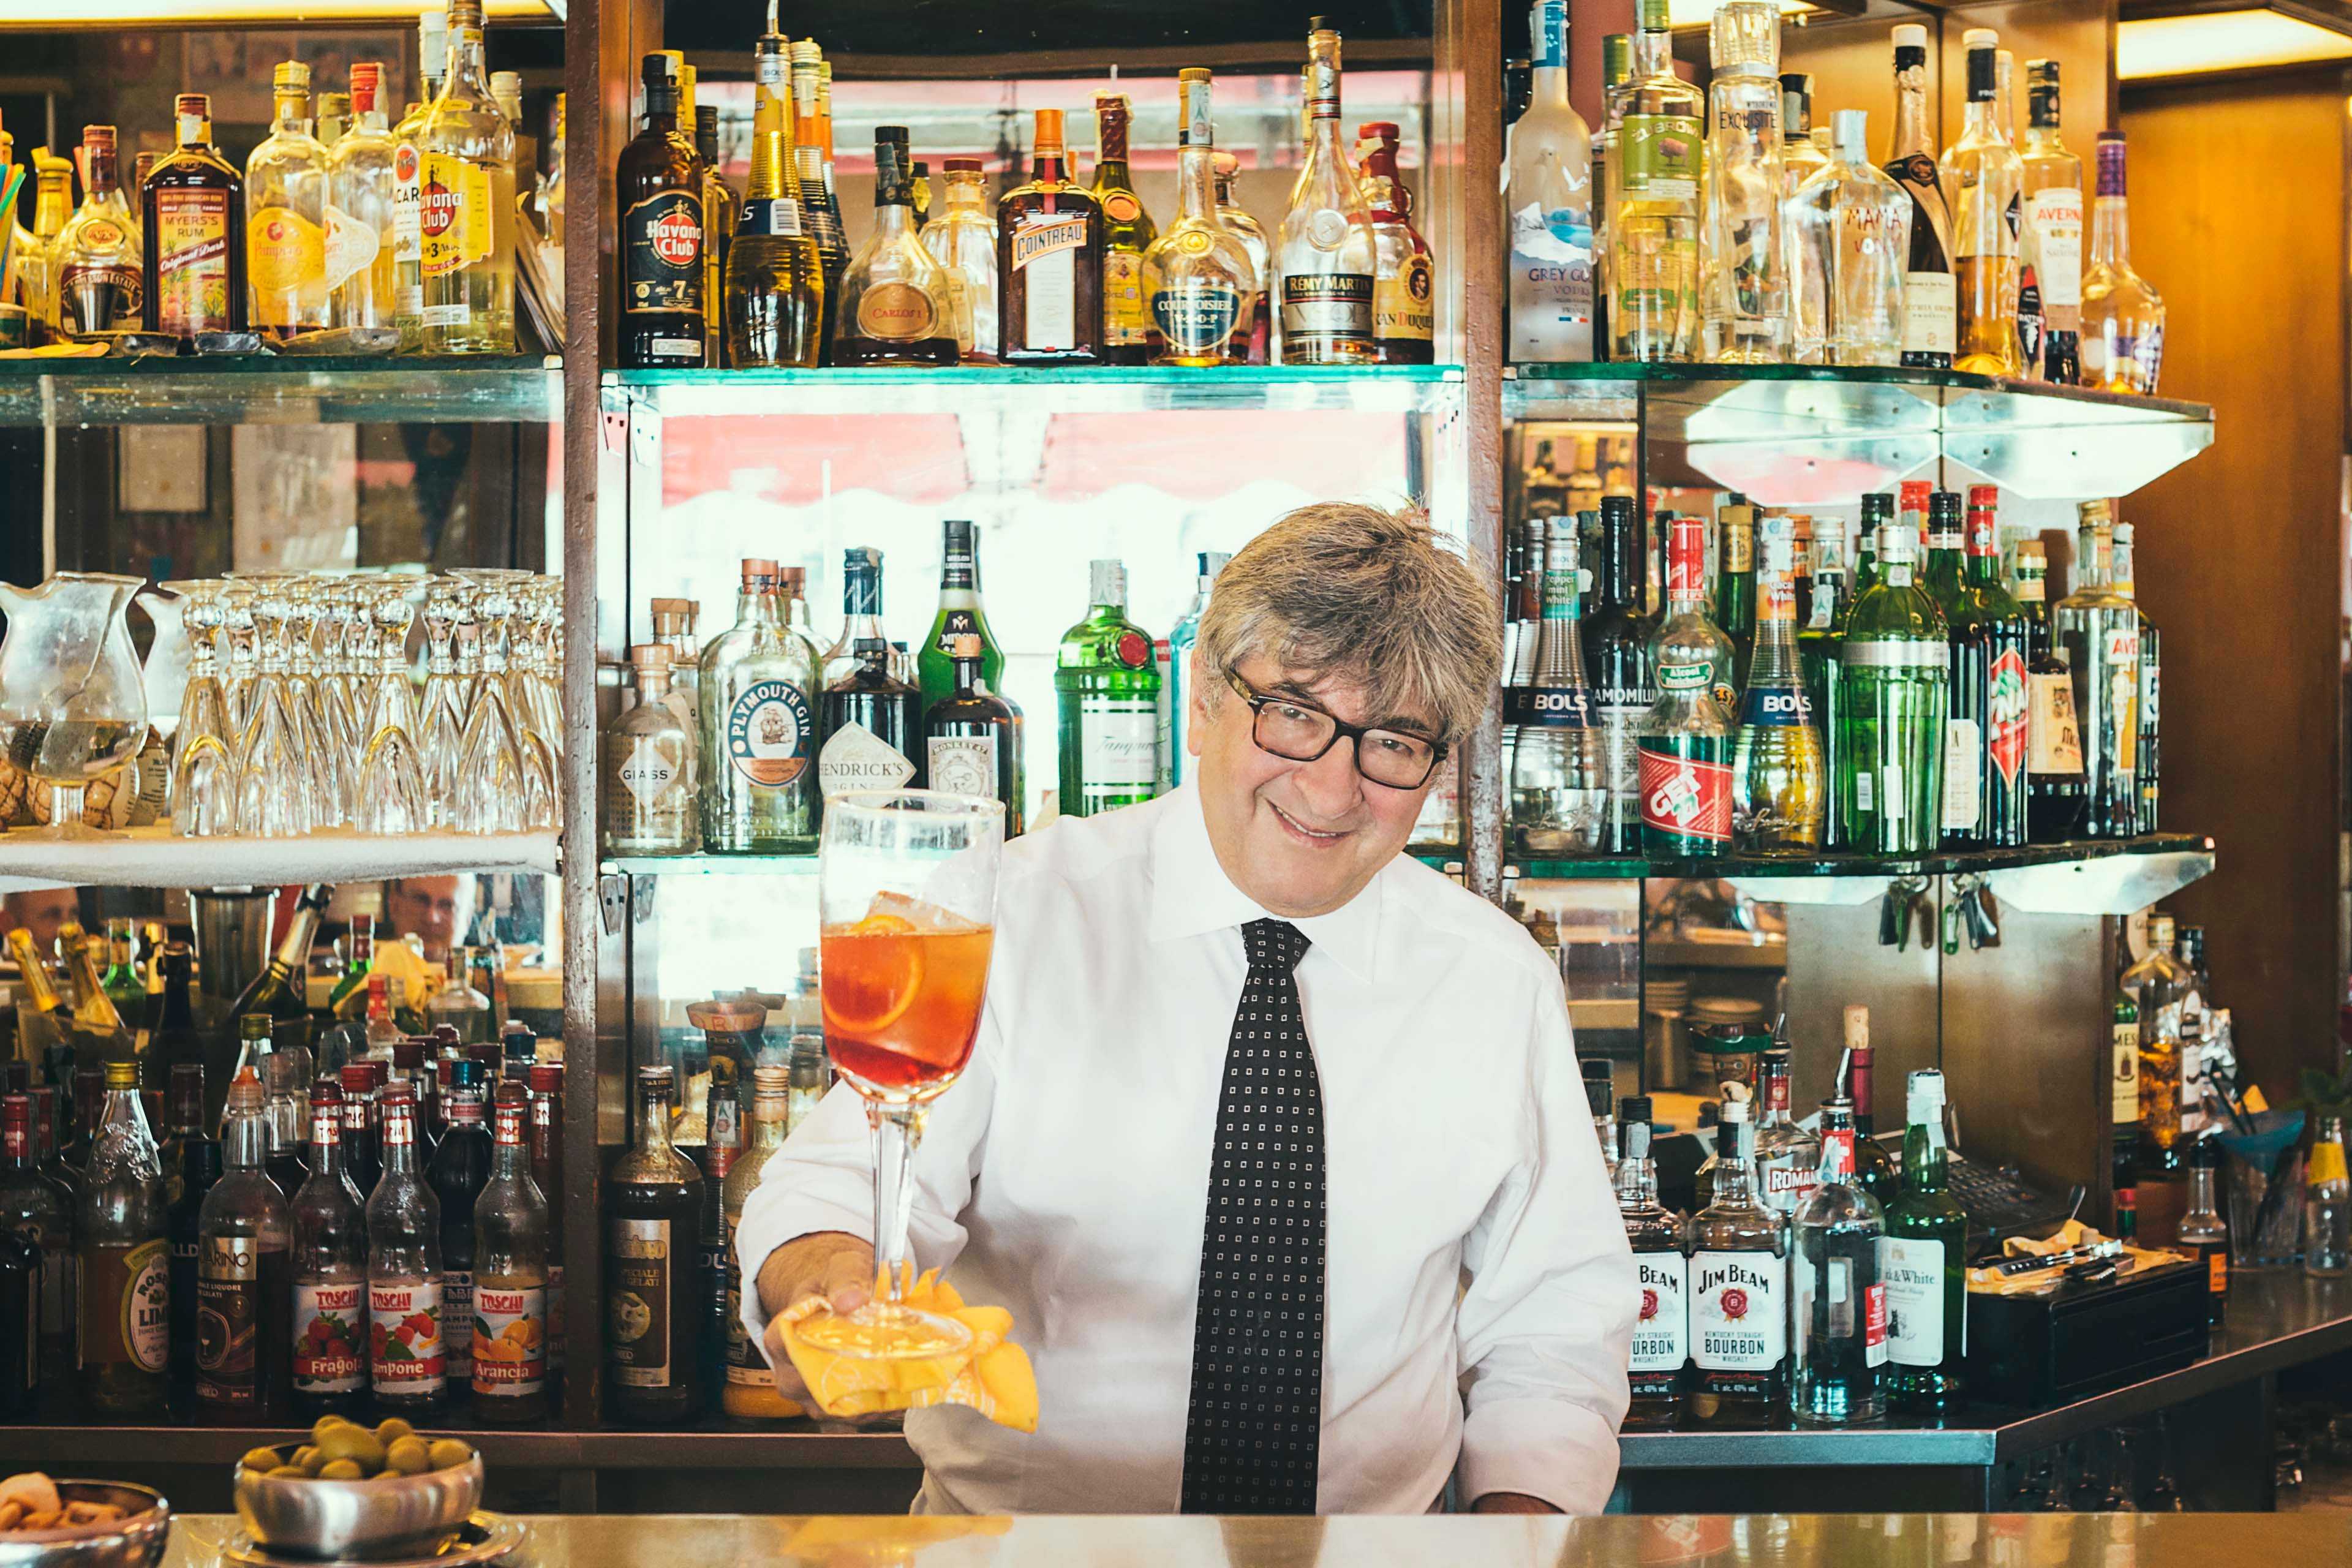 Maurizio Stocchetto standing behind a bar counter holding an orangey-pink drink, a negroni sbagliato.